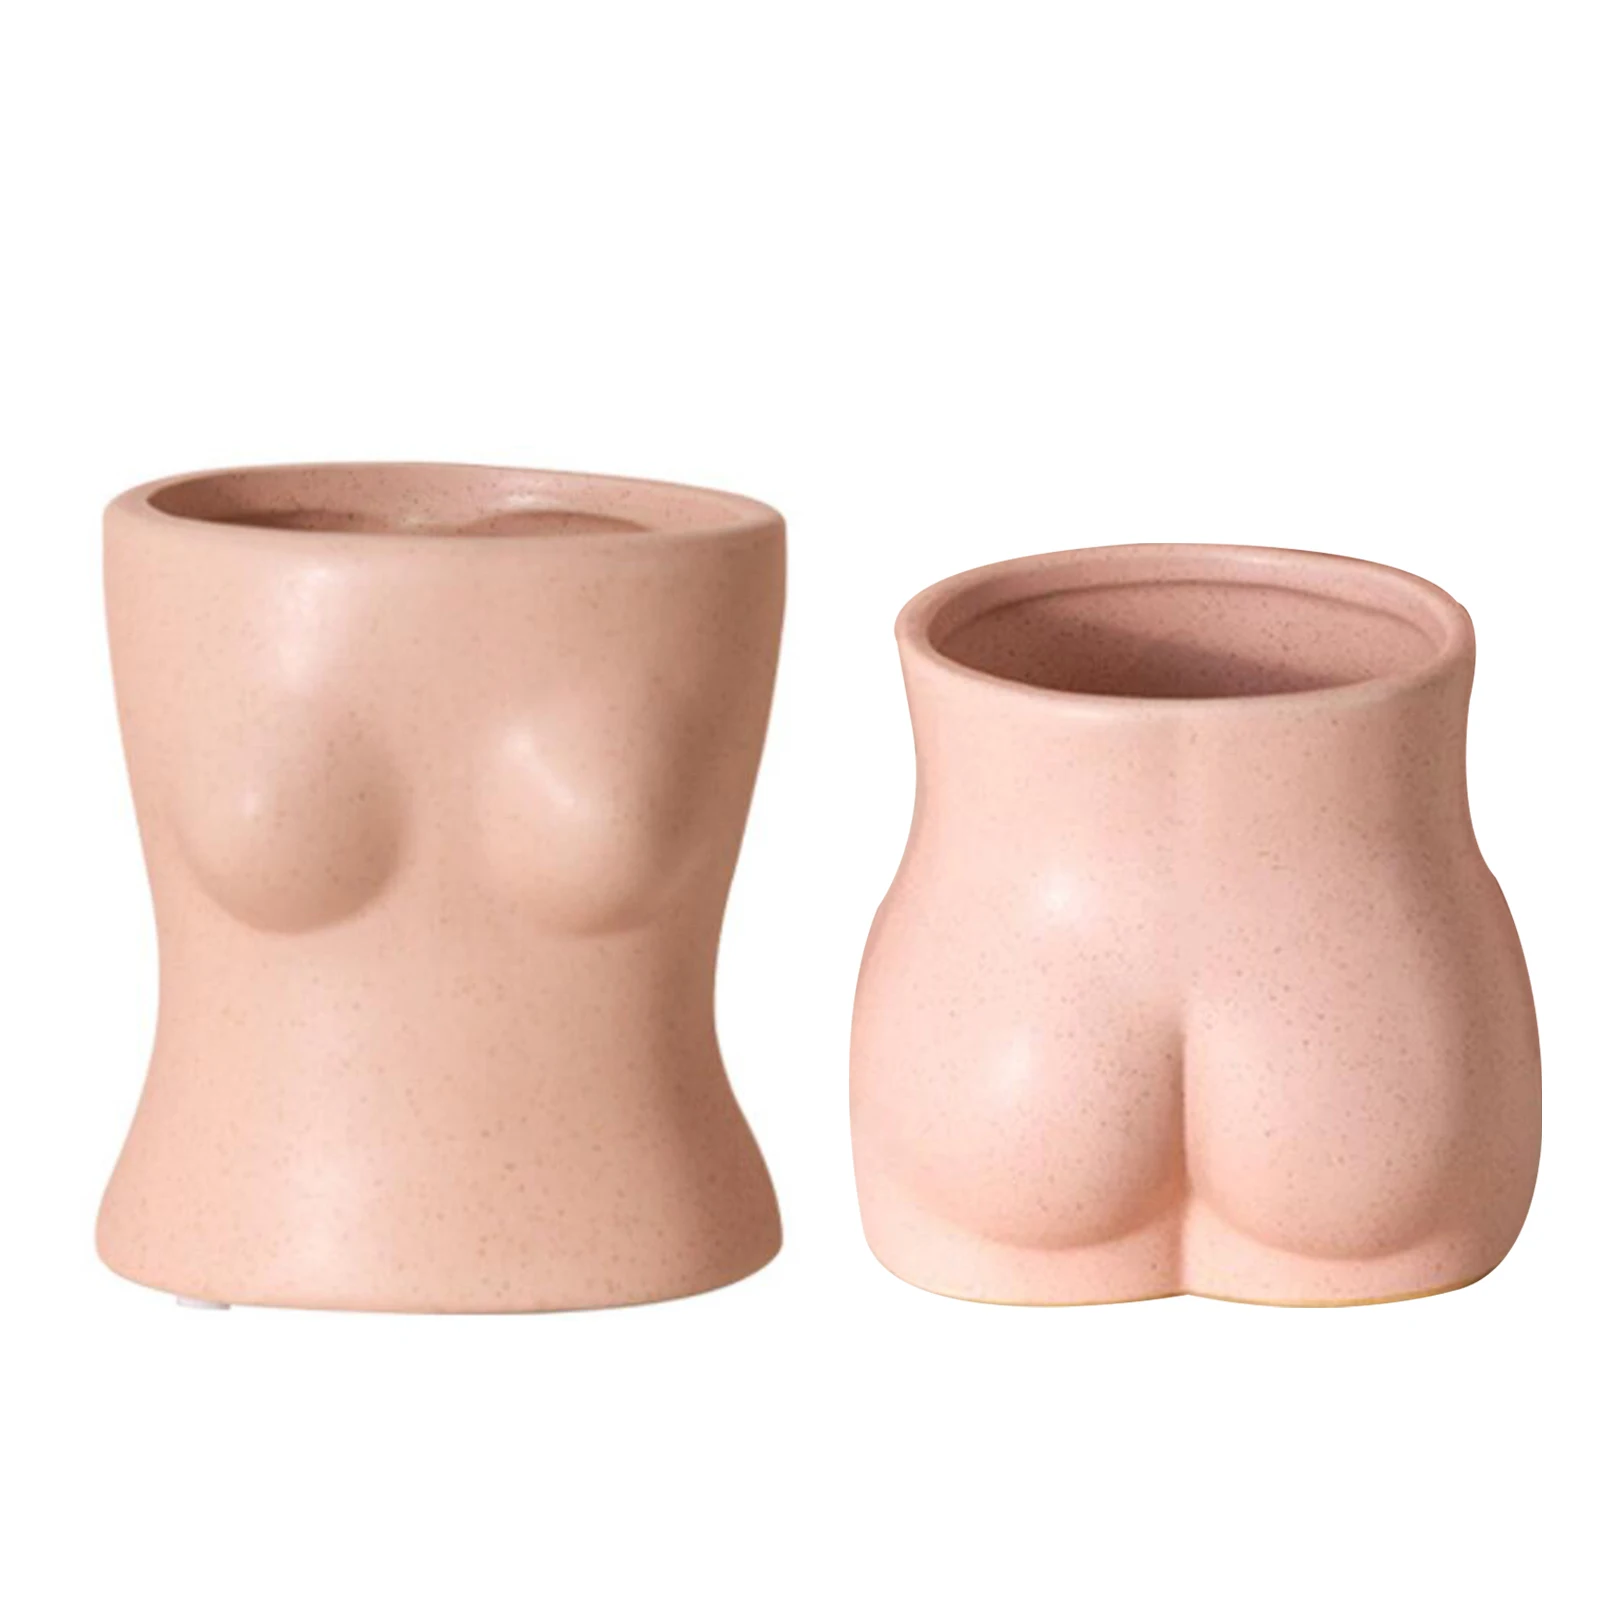 

Artificial Human Body Art Vase Nordic Ceramic Butt Nude Vase Ornament Office Pen Holder Home Decoration For Wedding Decor Party